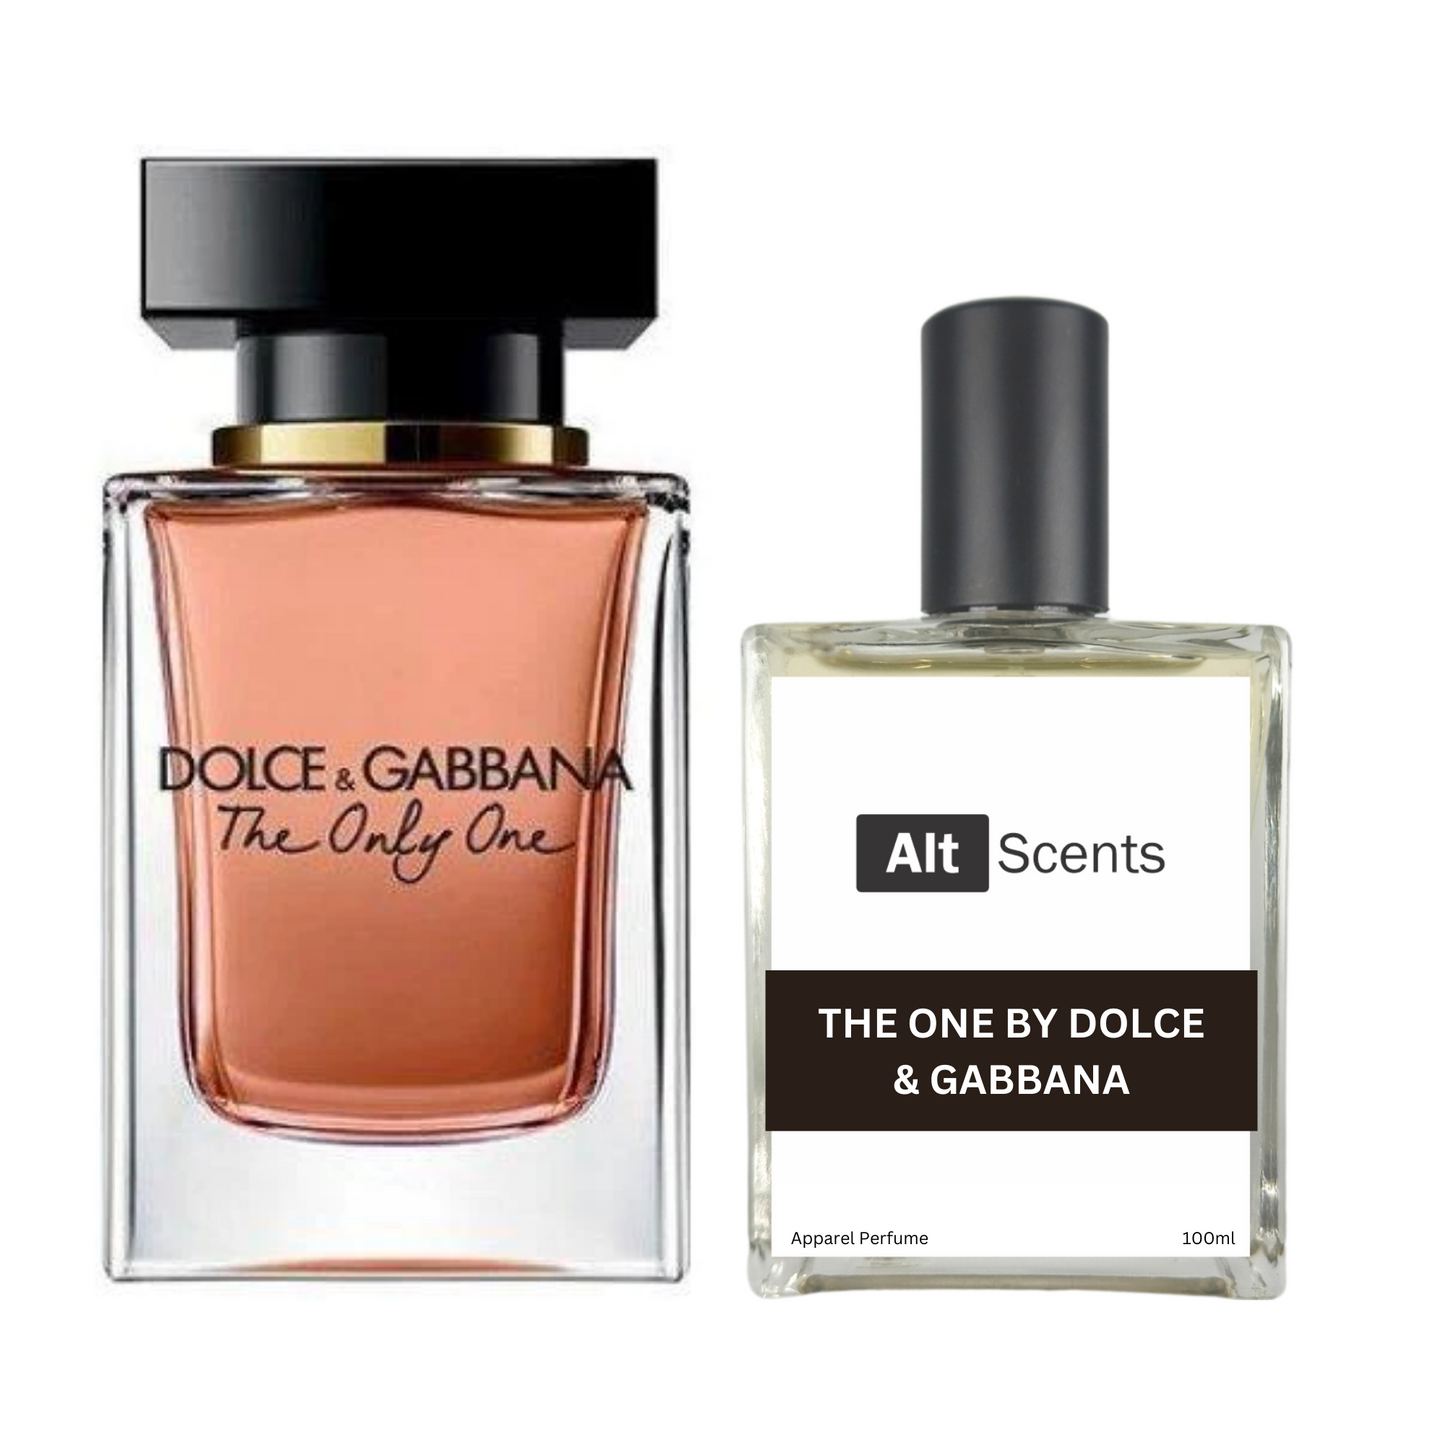 The One by Dolce & Gabbana type Perfume for Men